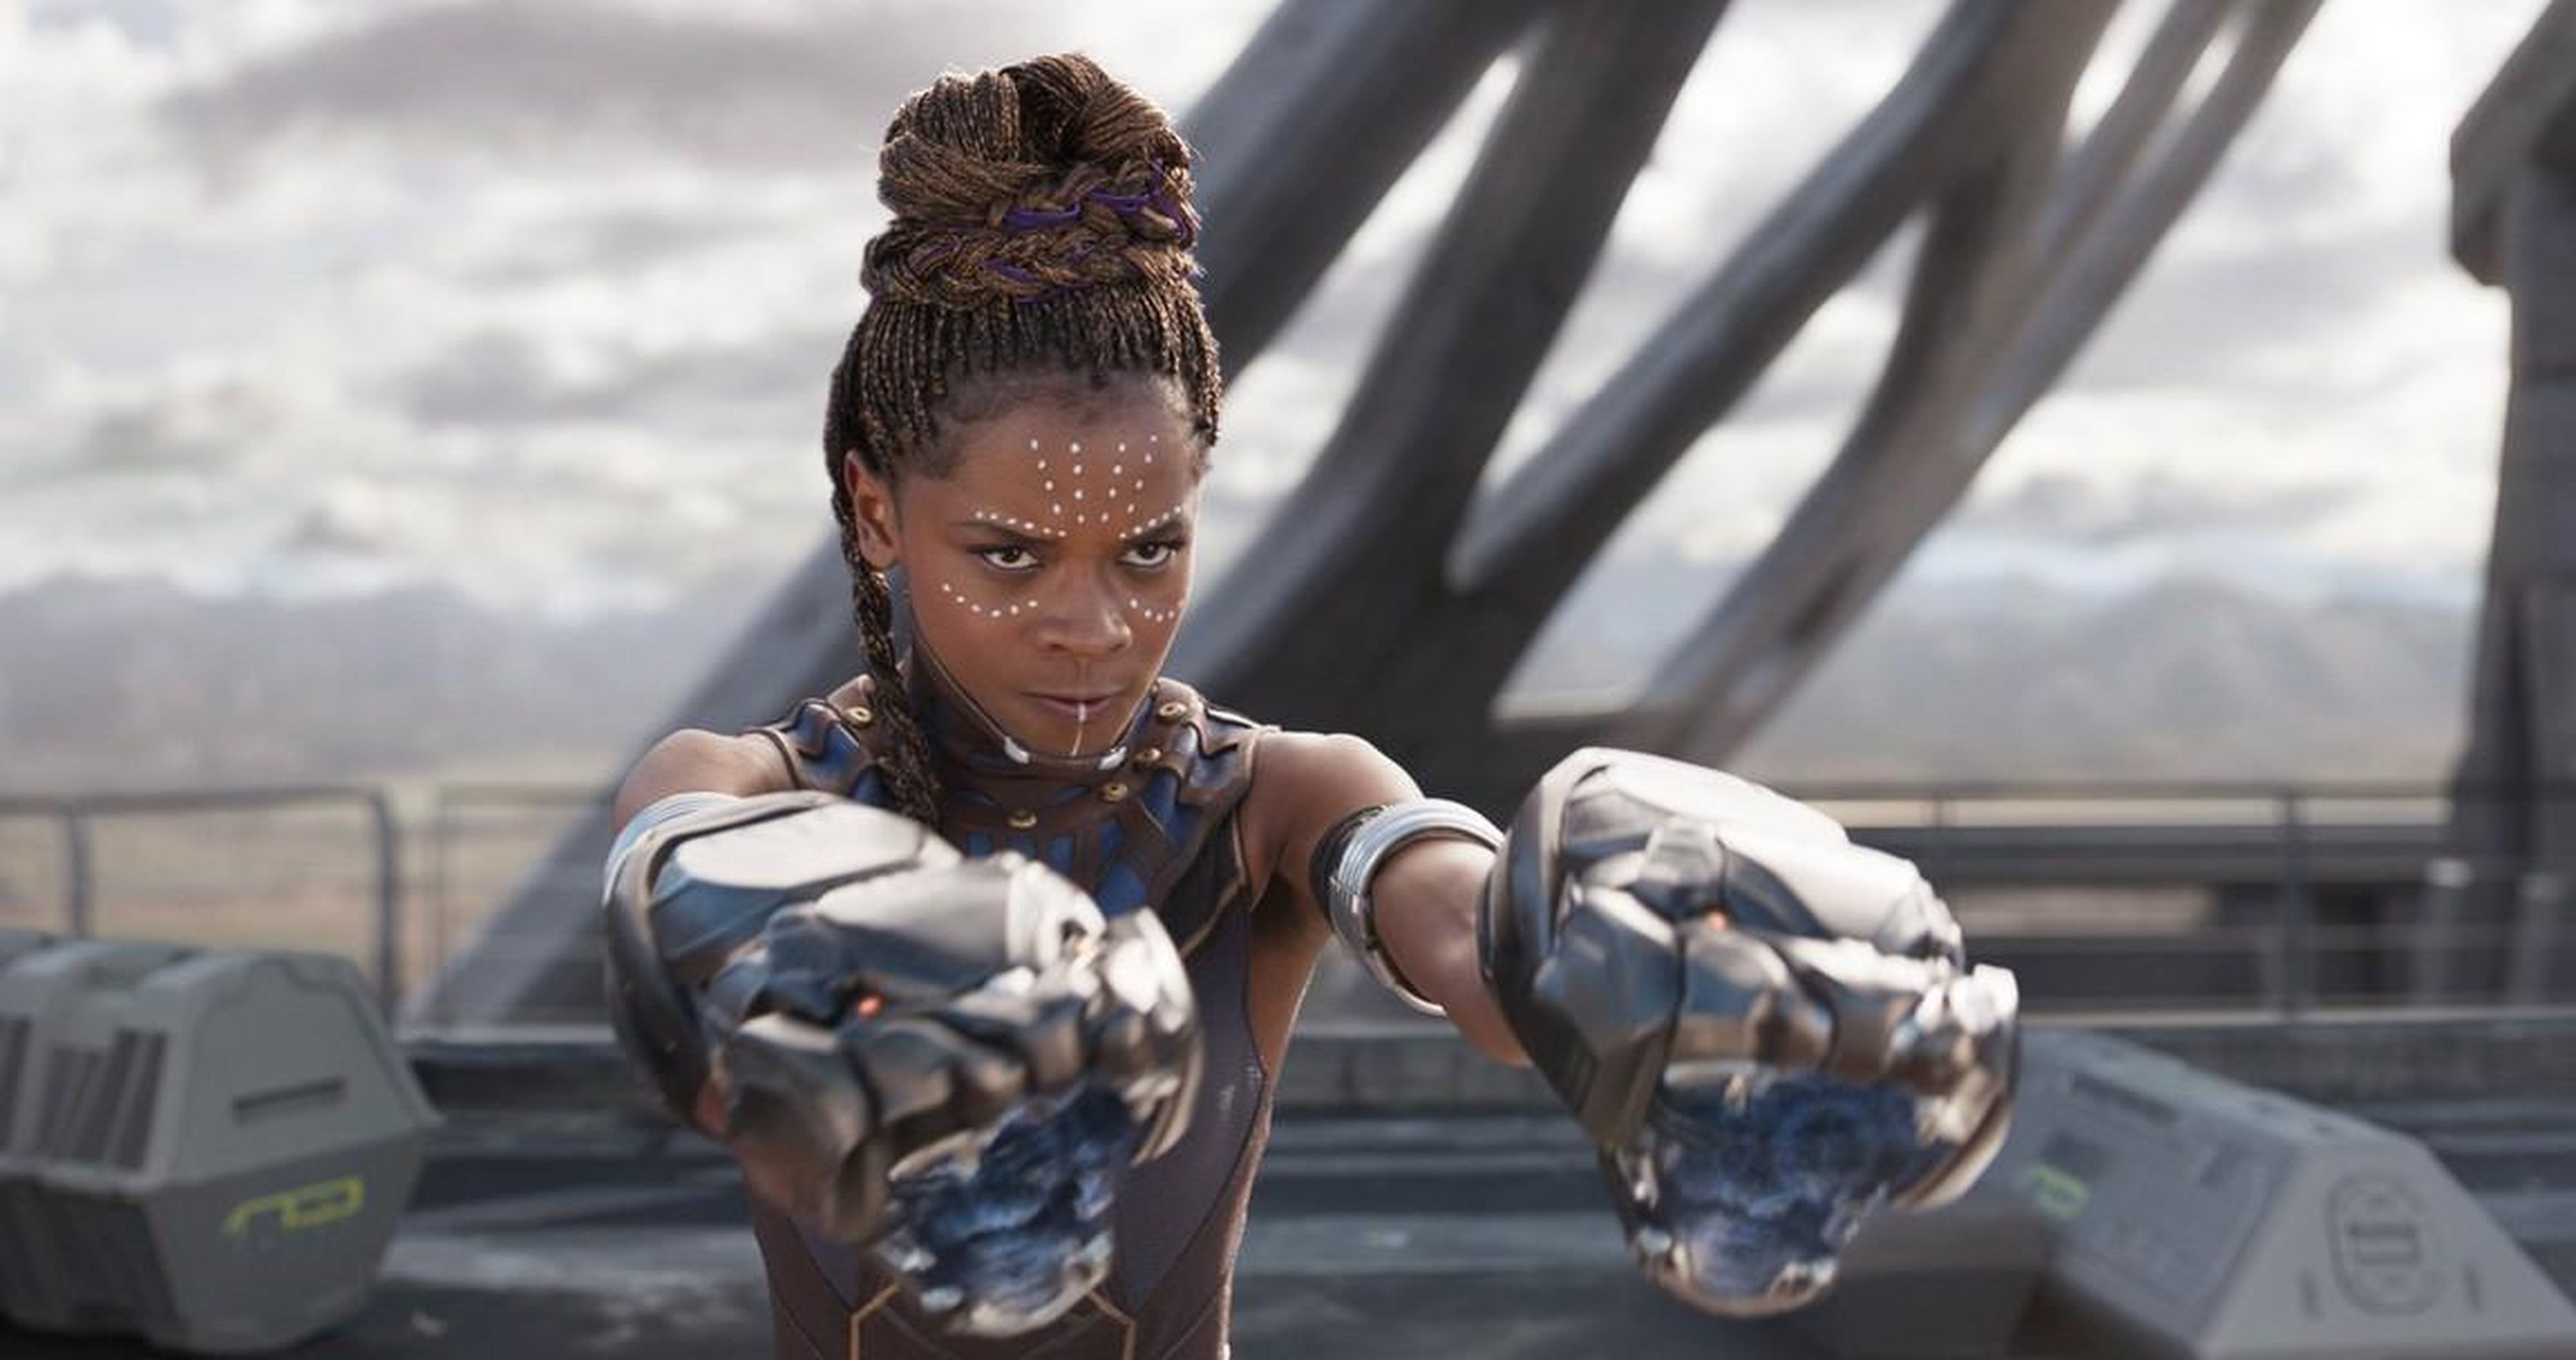 20. Letitia Wright as Shuri in "Black Panther"